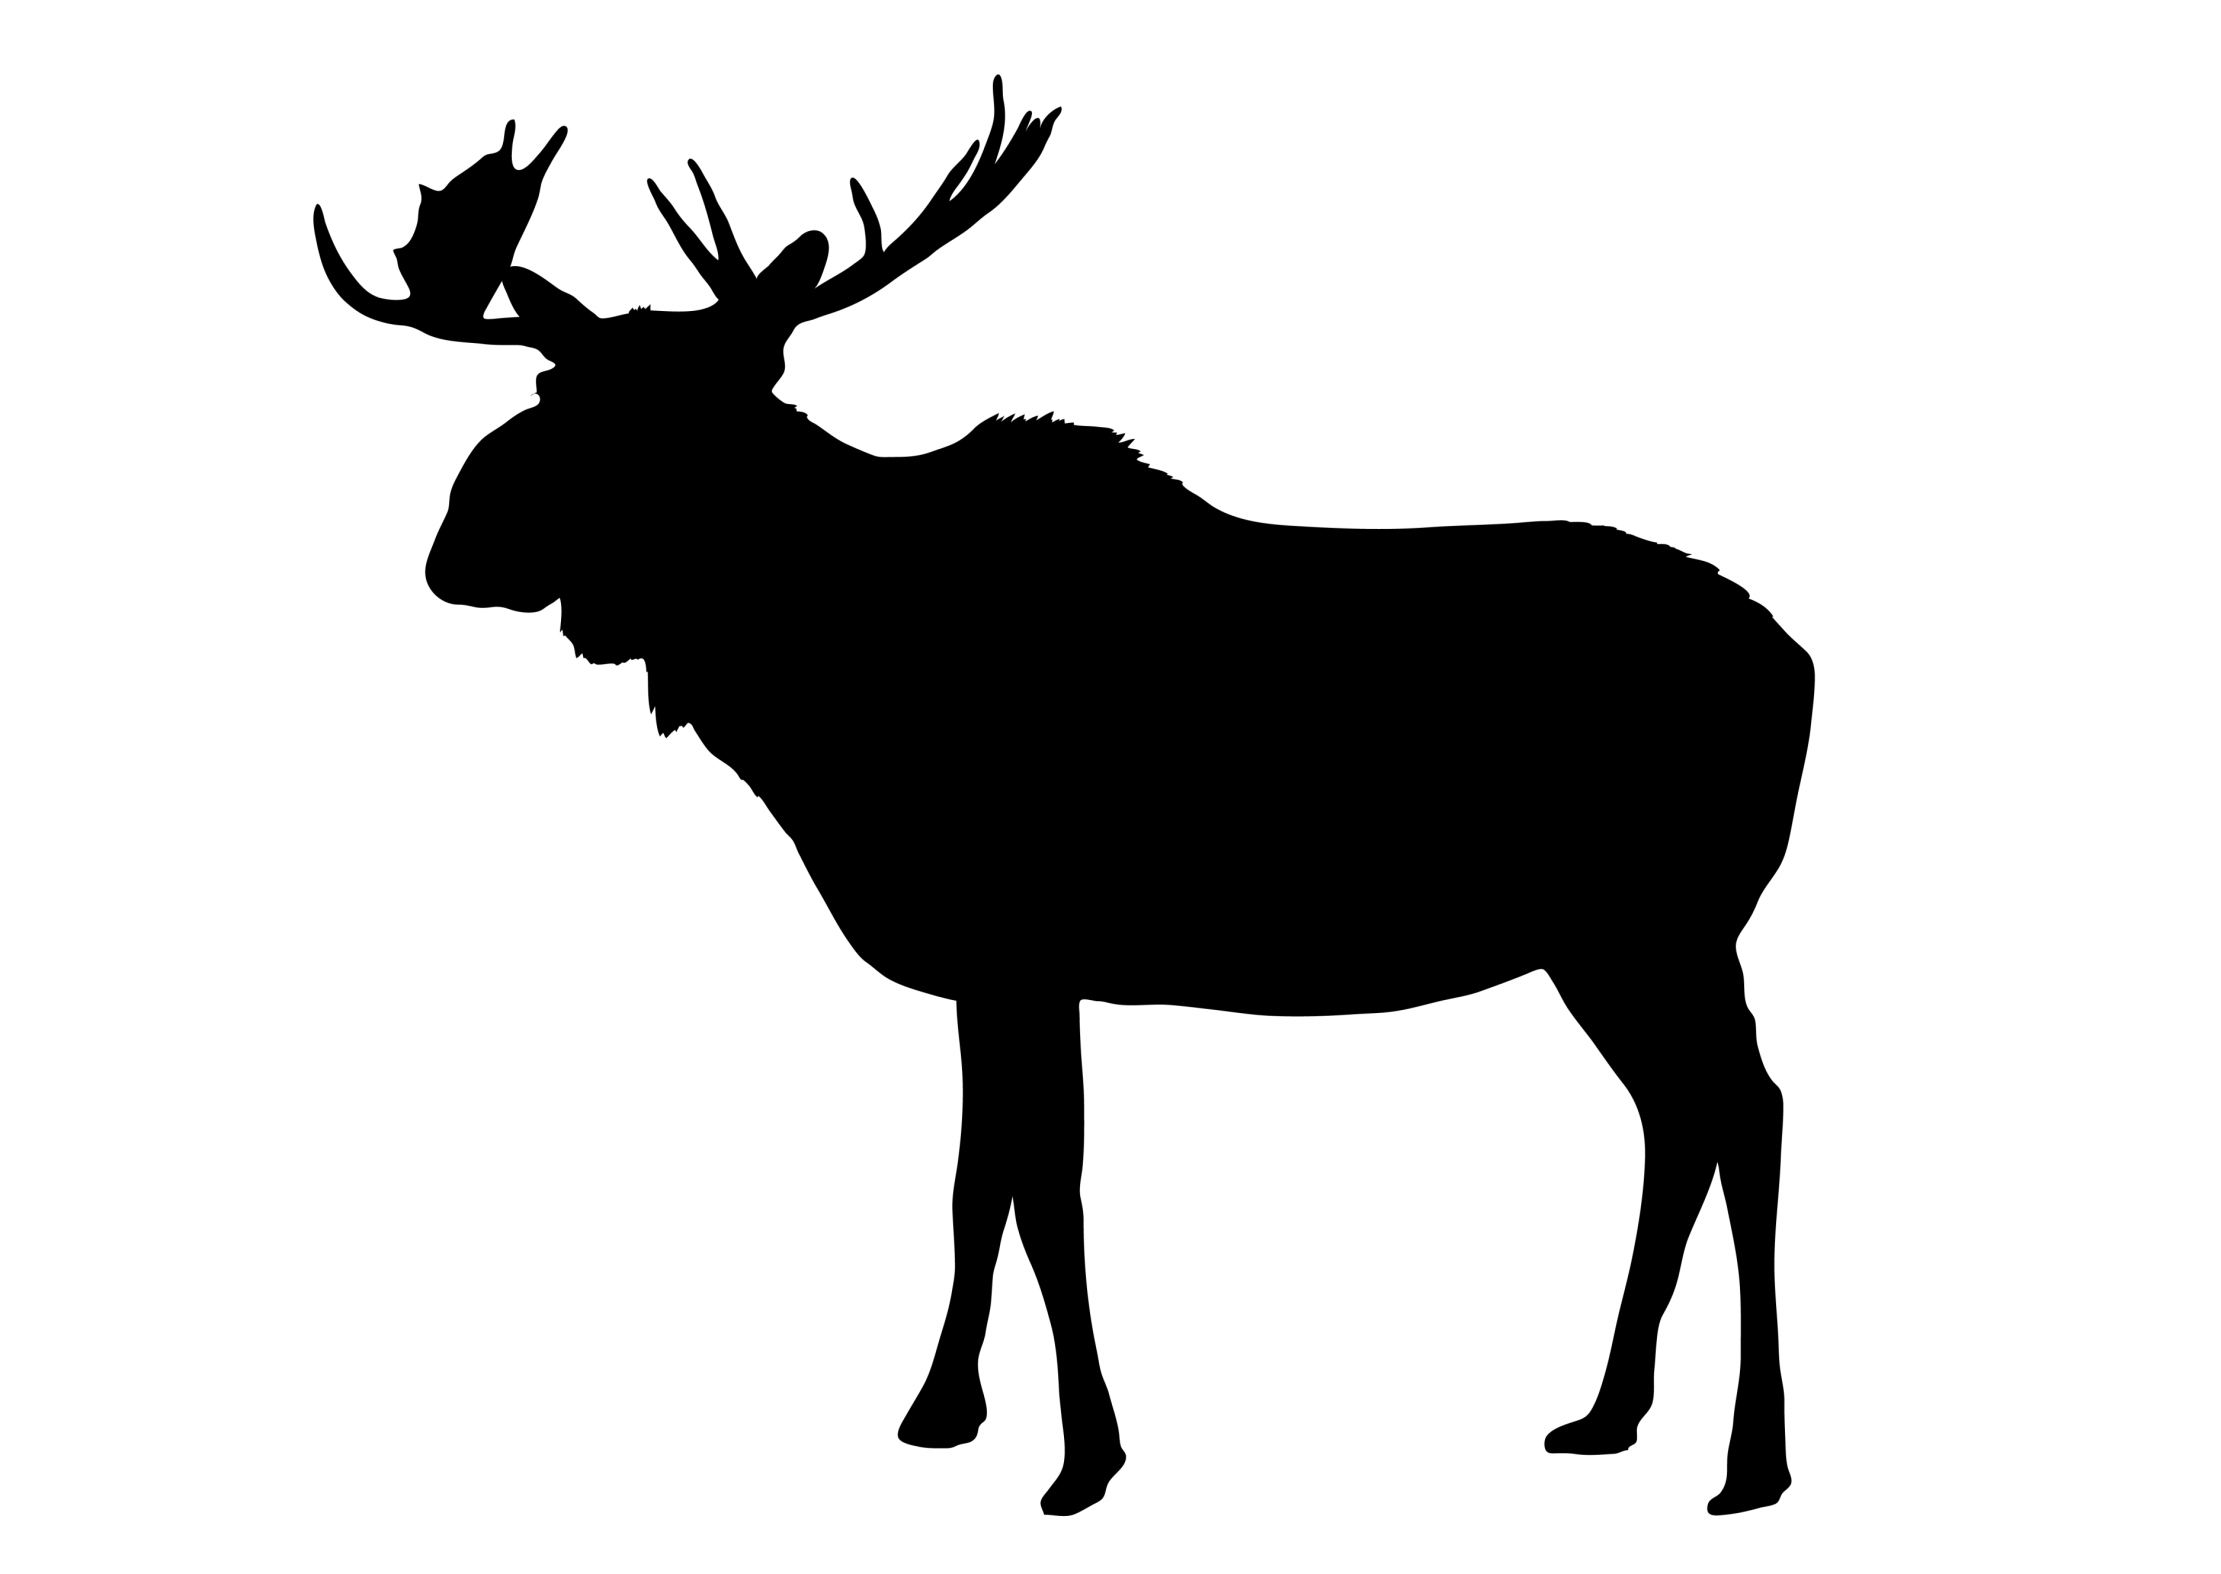 Moose Silhouette Vector Free - ClipArt Best